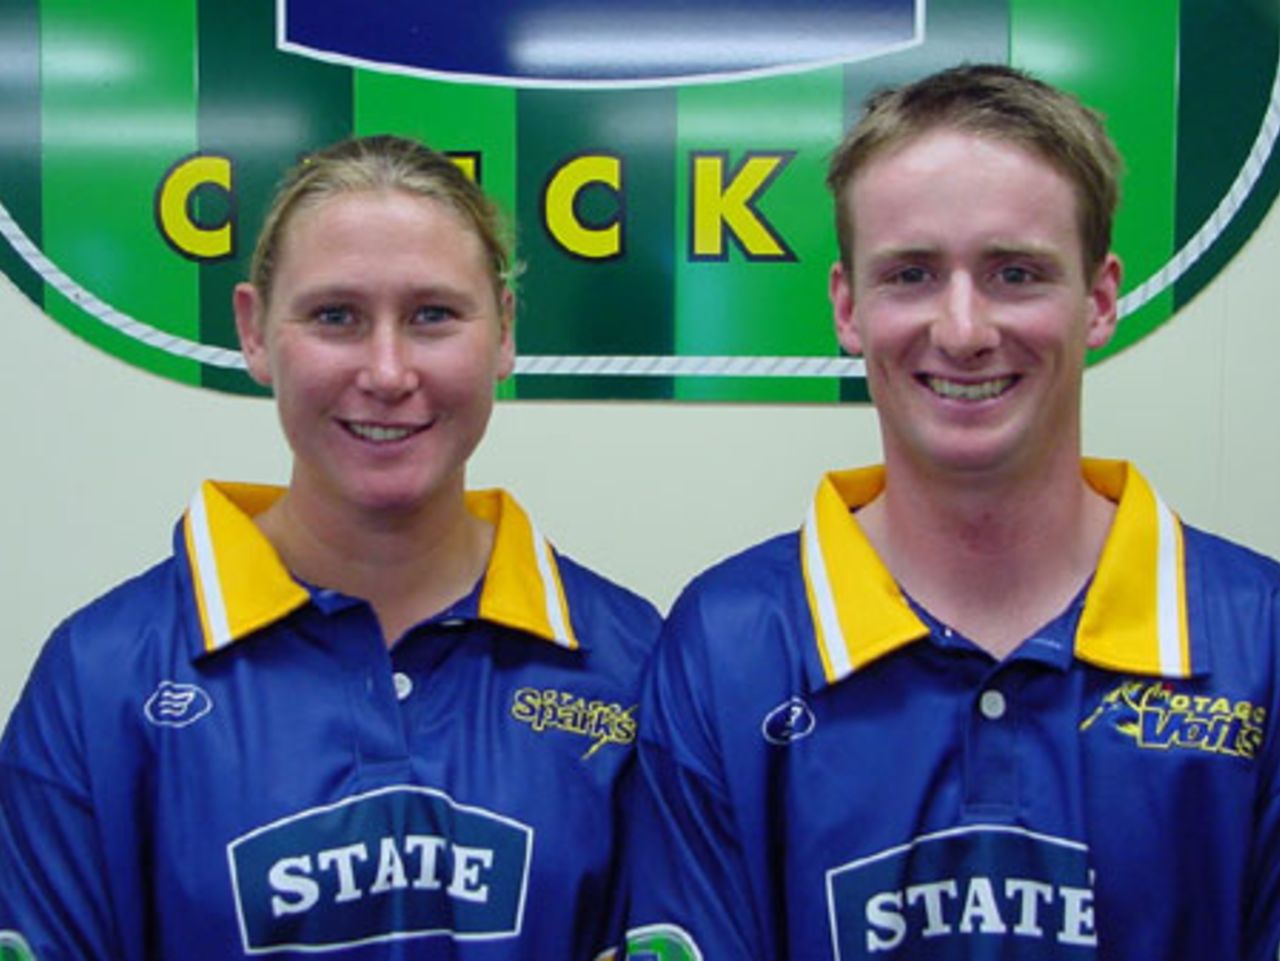 State Otago Sparks player Rowan Milburn and State Otago Volts player Robbie Lawson model the new uniforms for the 2001/02 season. 4 October 2001.